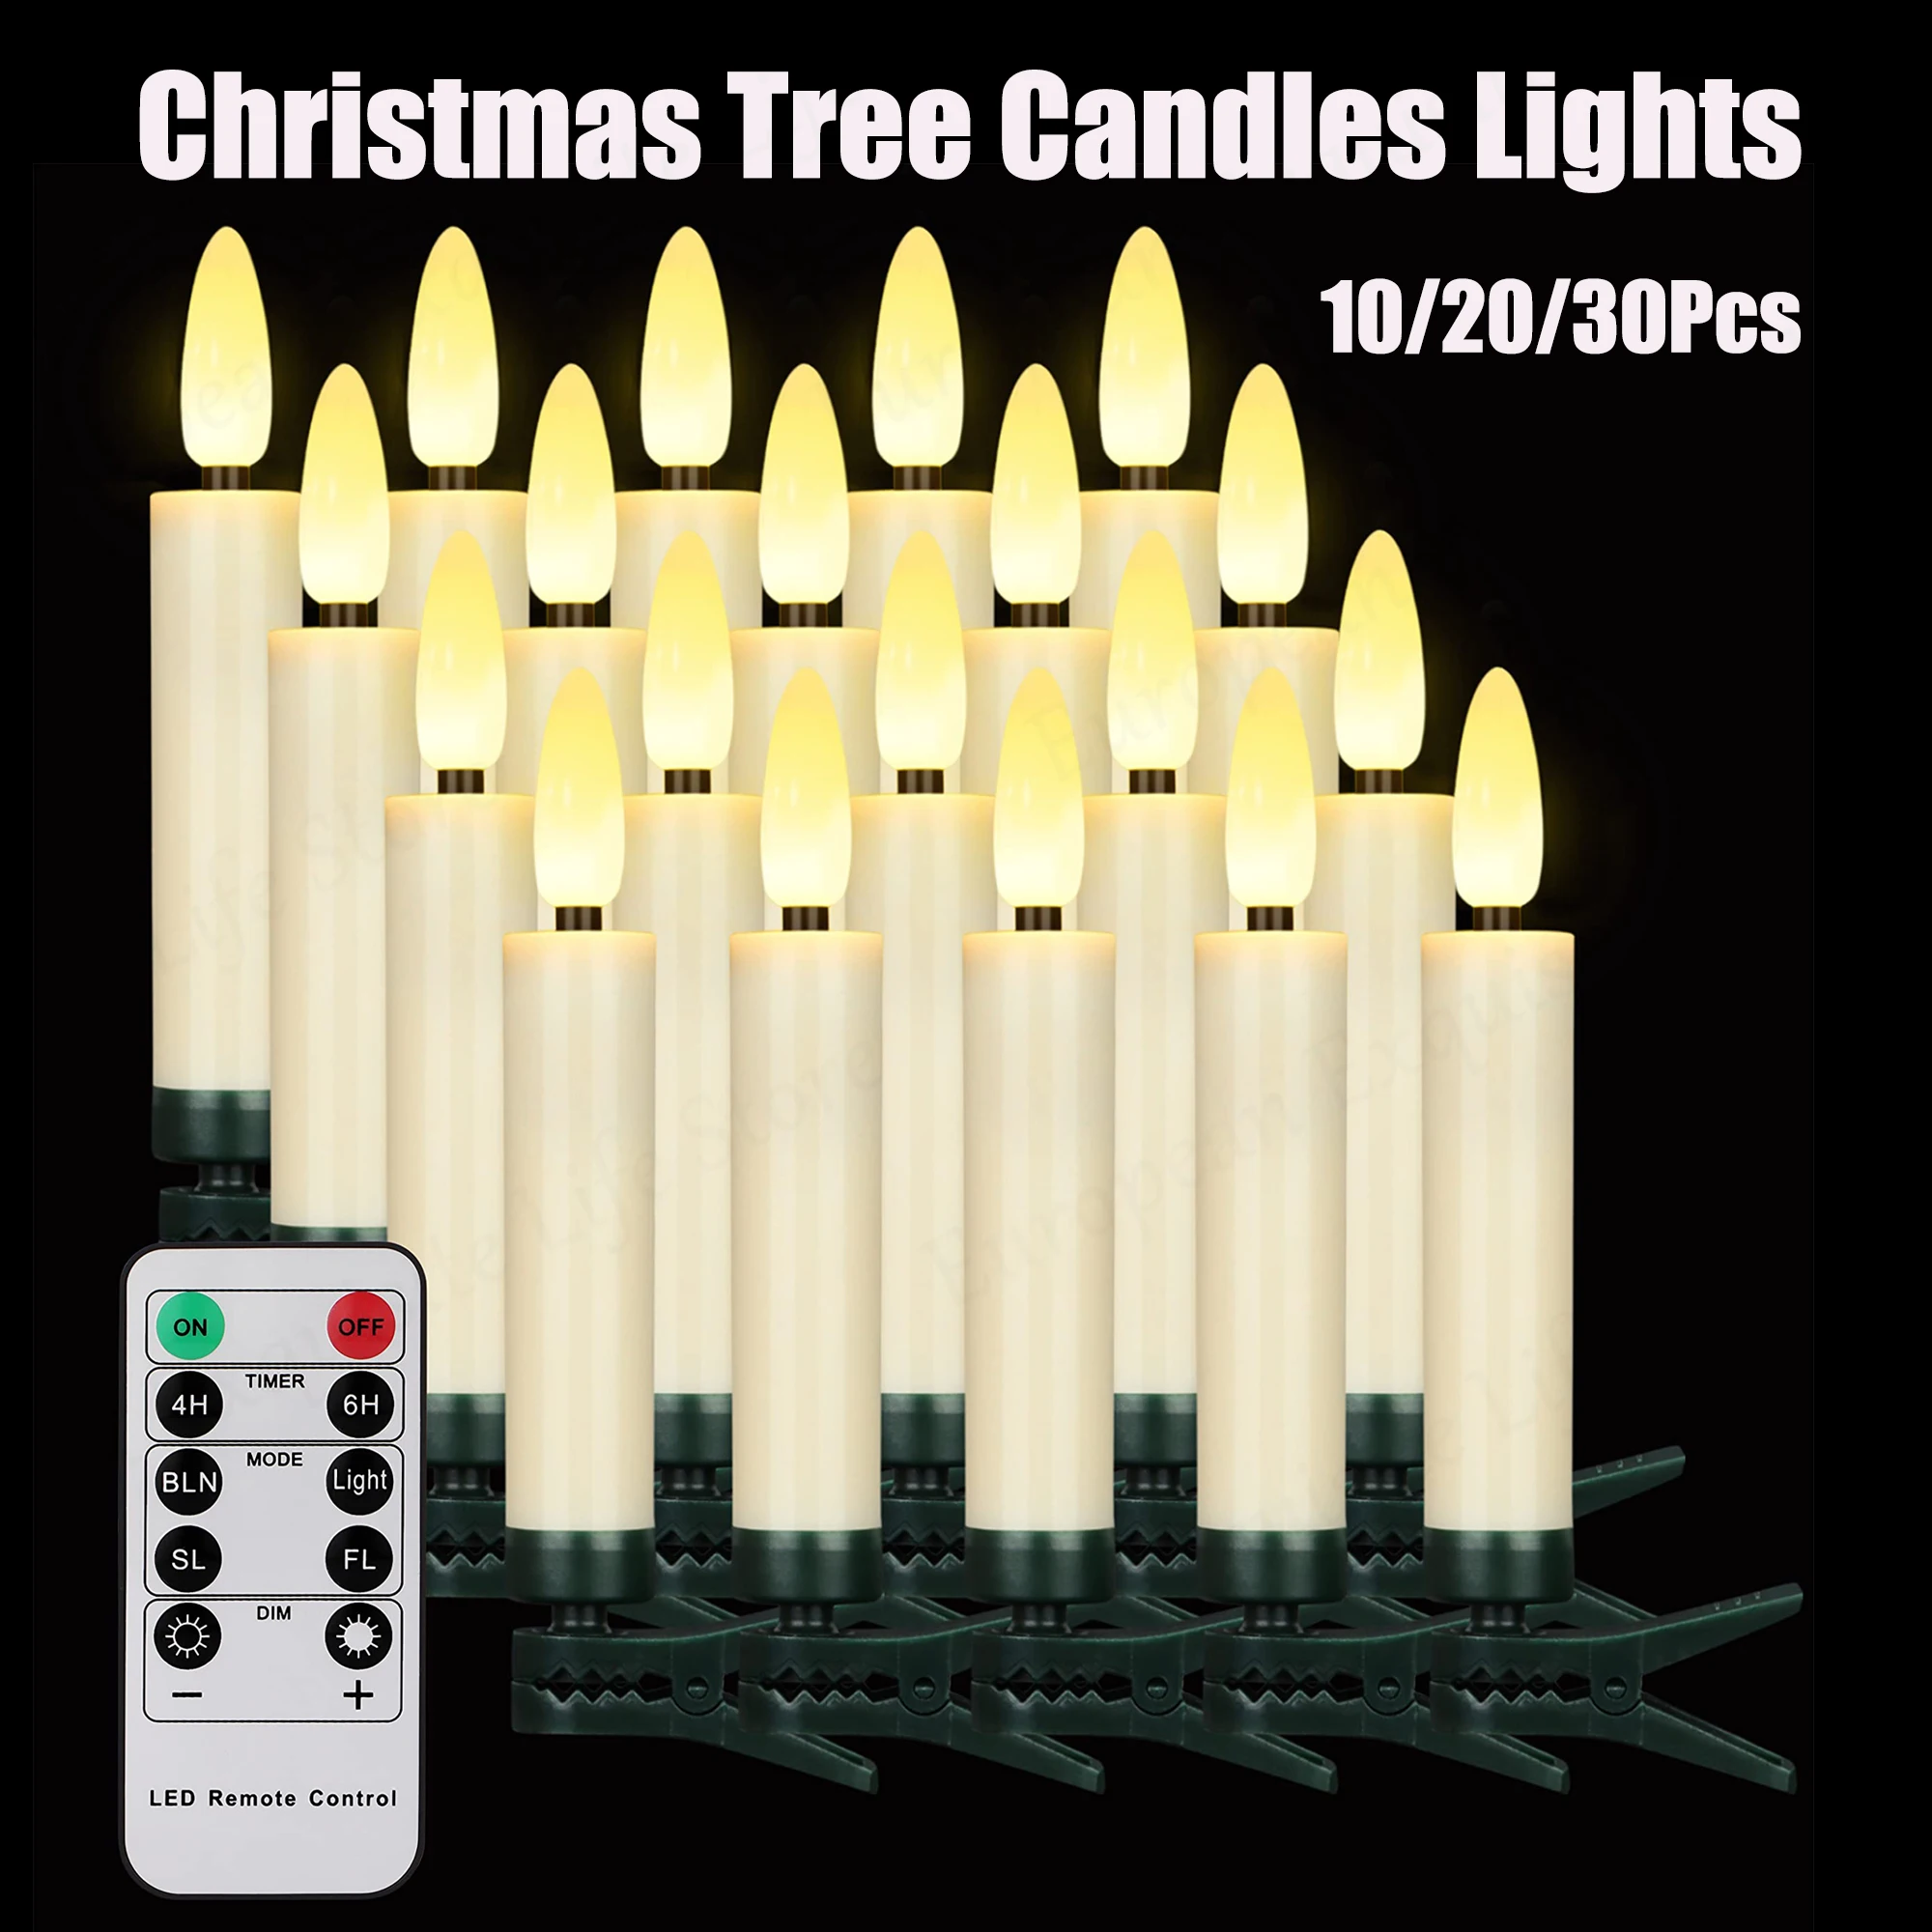 

10/20/30Pcs Christmas Tree Candles Lights LED Flameless Taper Candles Flickering with Remote Timer and Dimmable for Xmas/Wedding